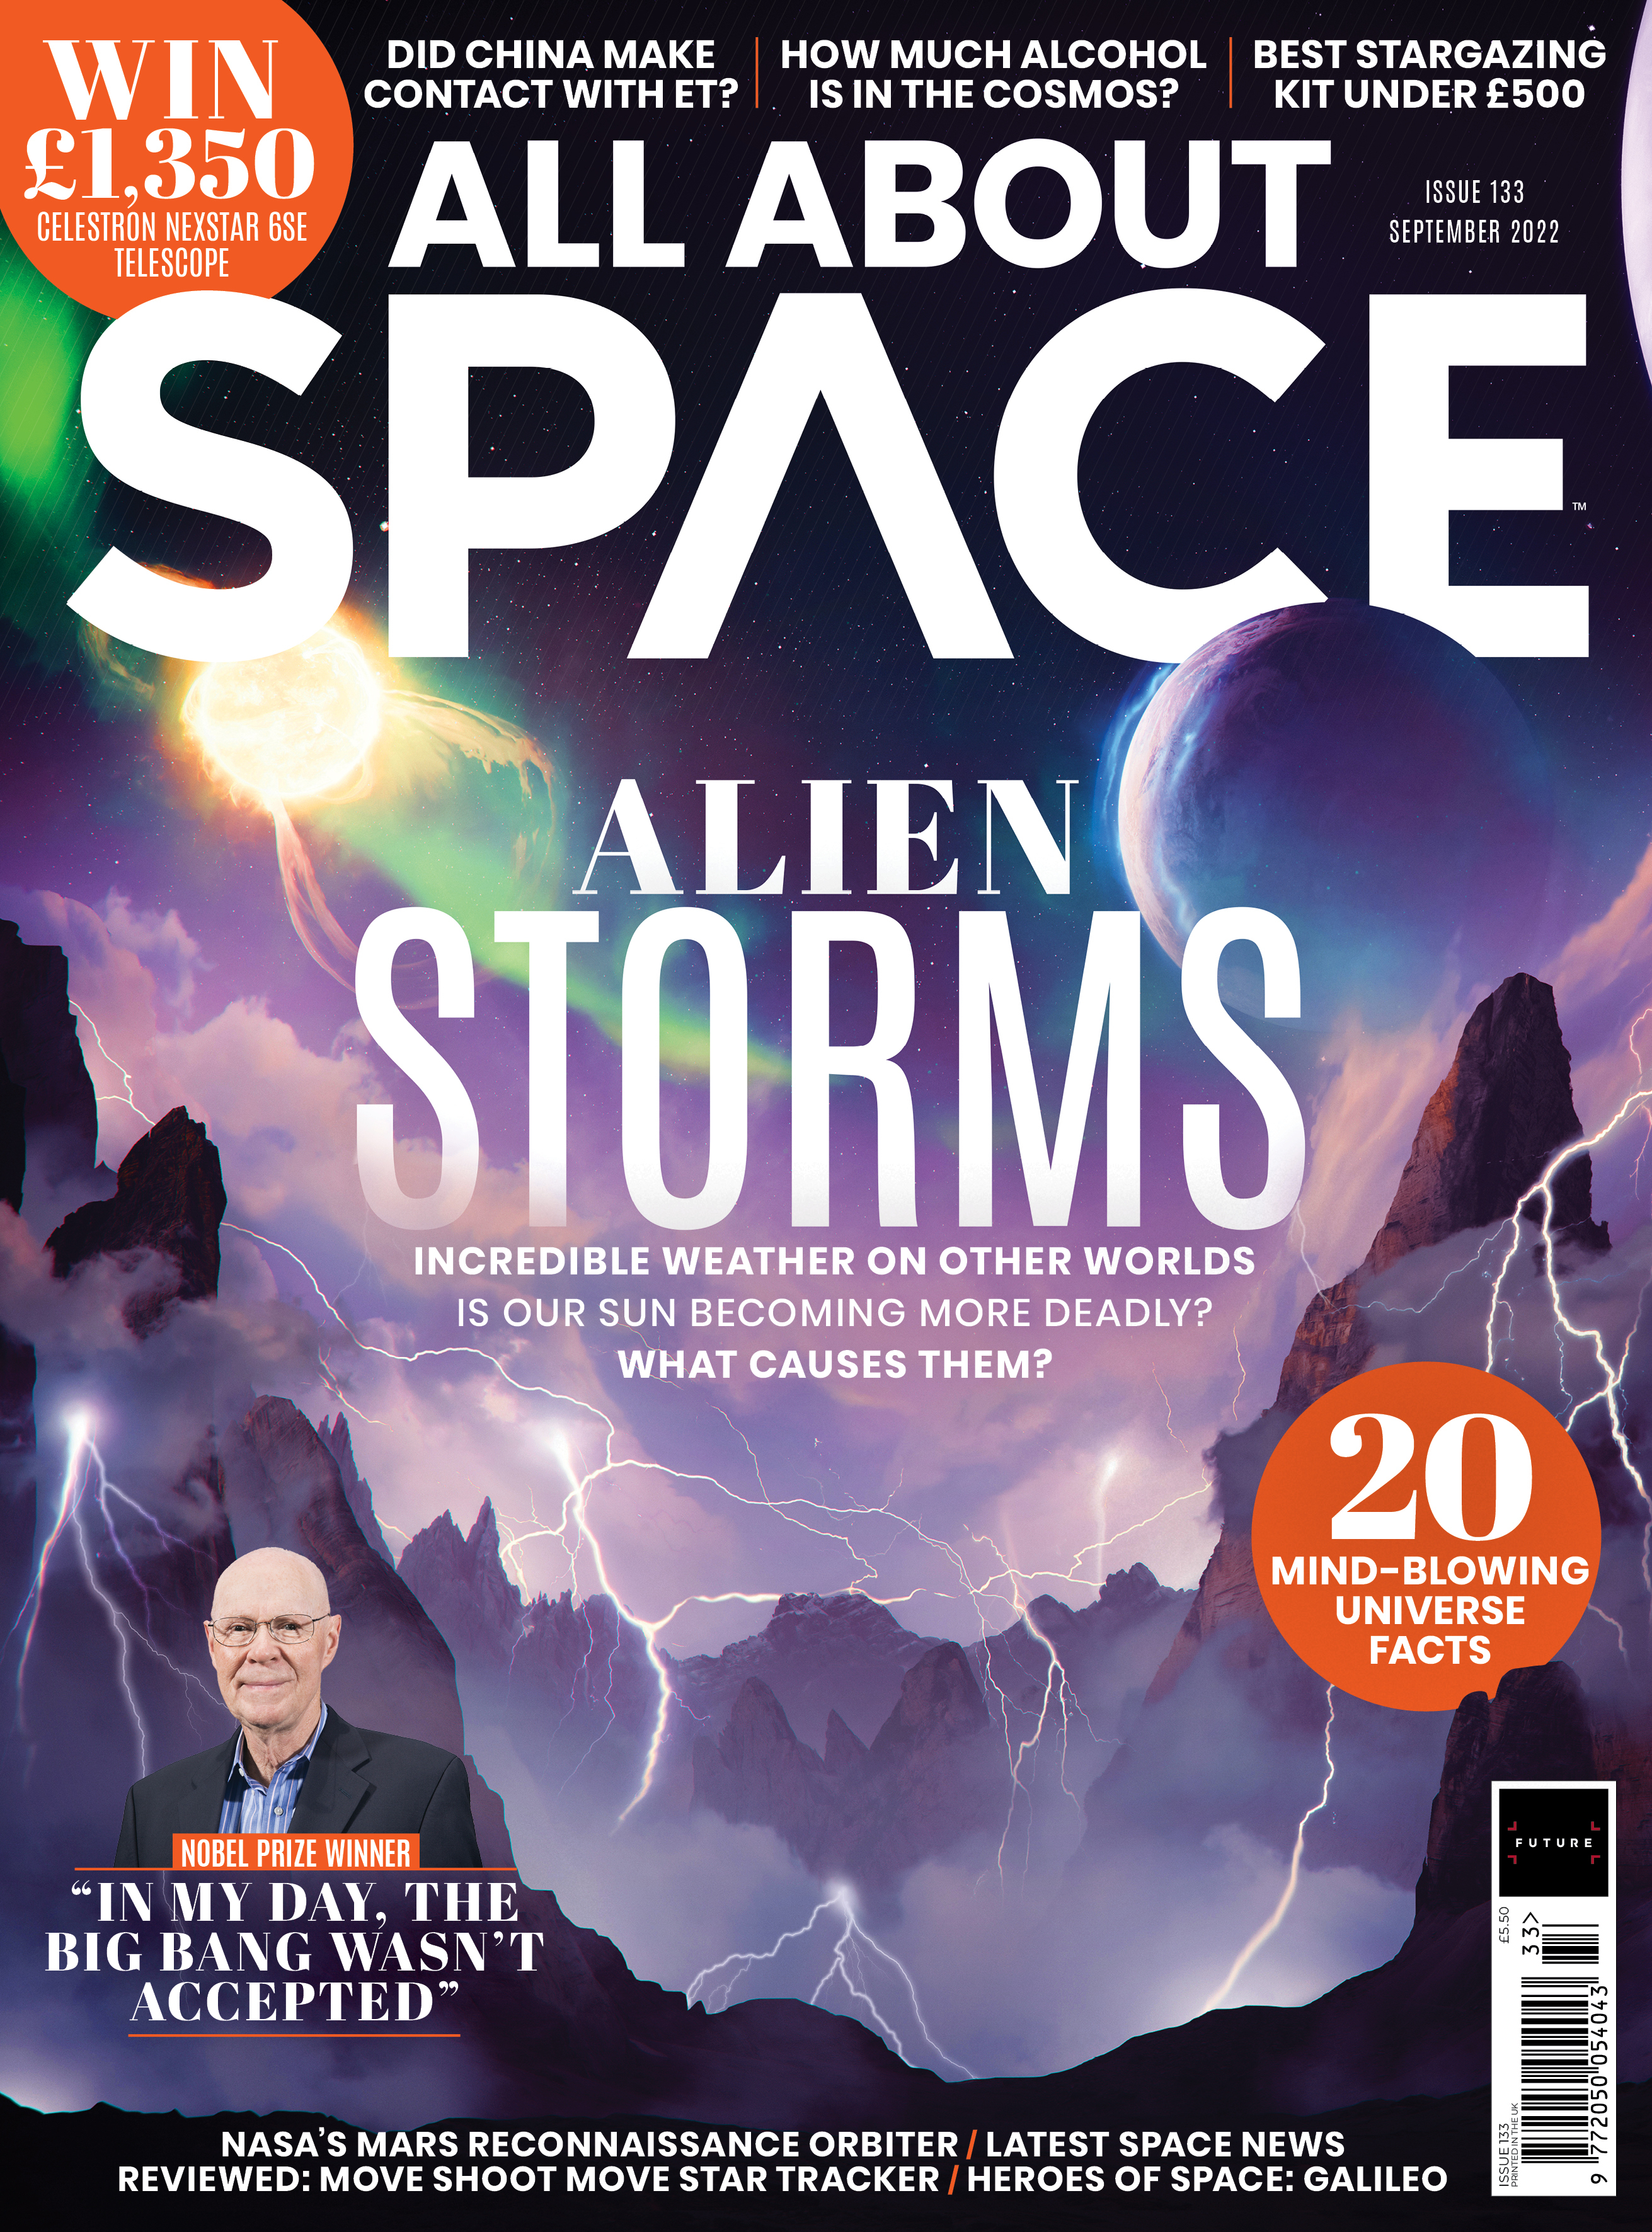 All About Space issue 133 front cover.